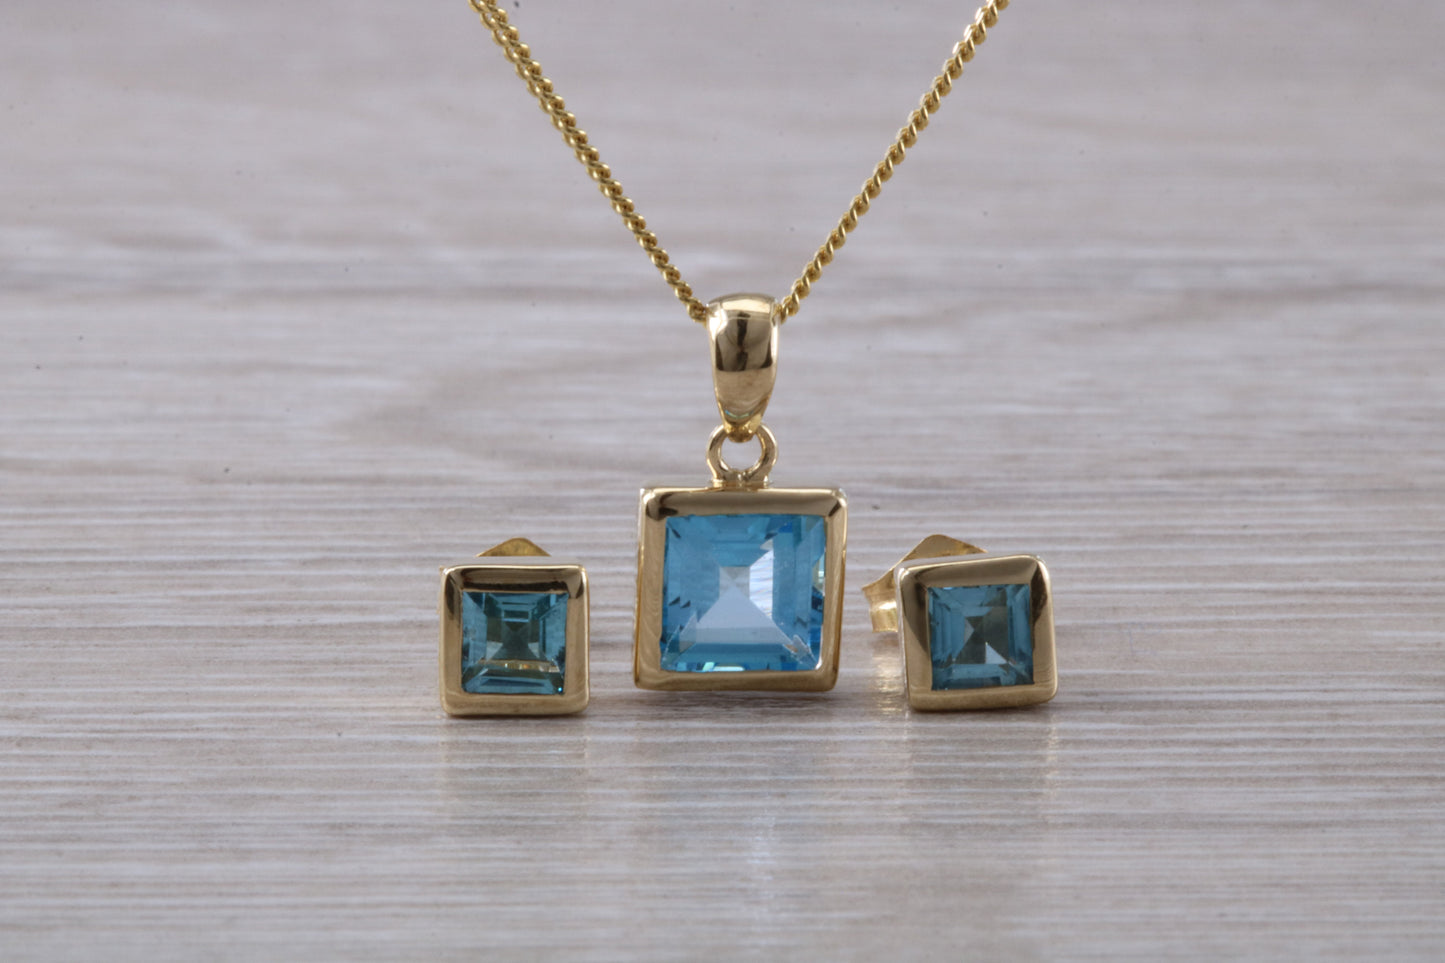 Real Topaz Earrings and Necklace Set, Solid 9ct Yellow Gold